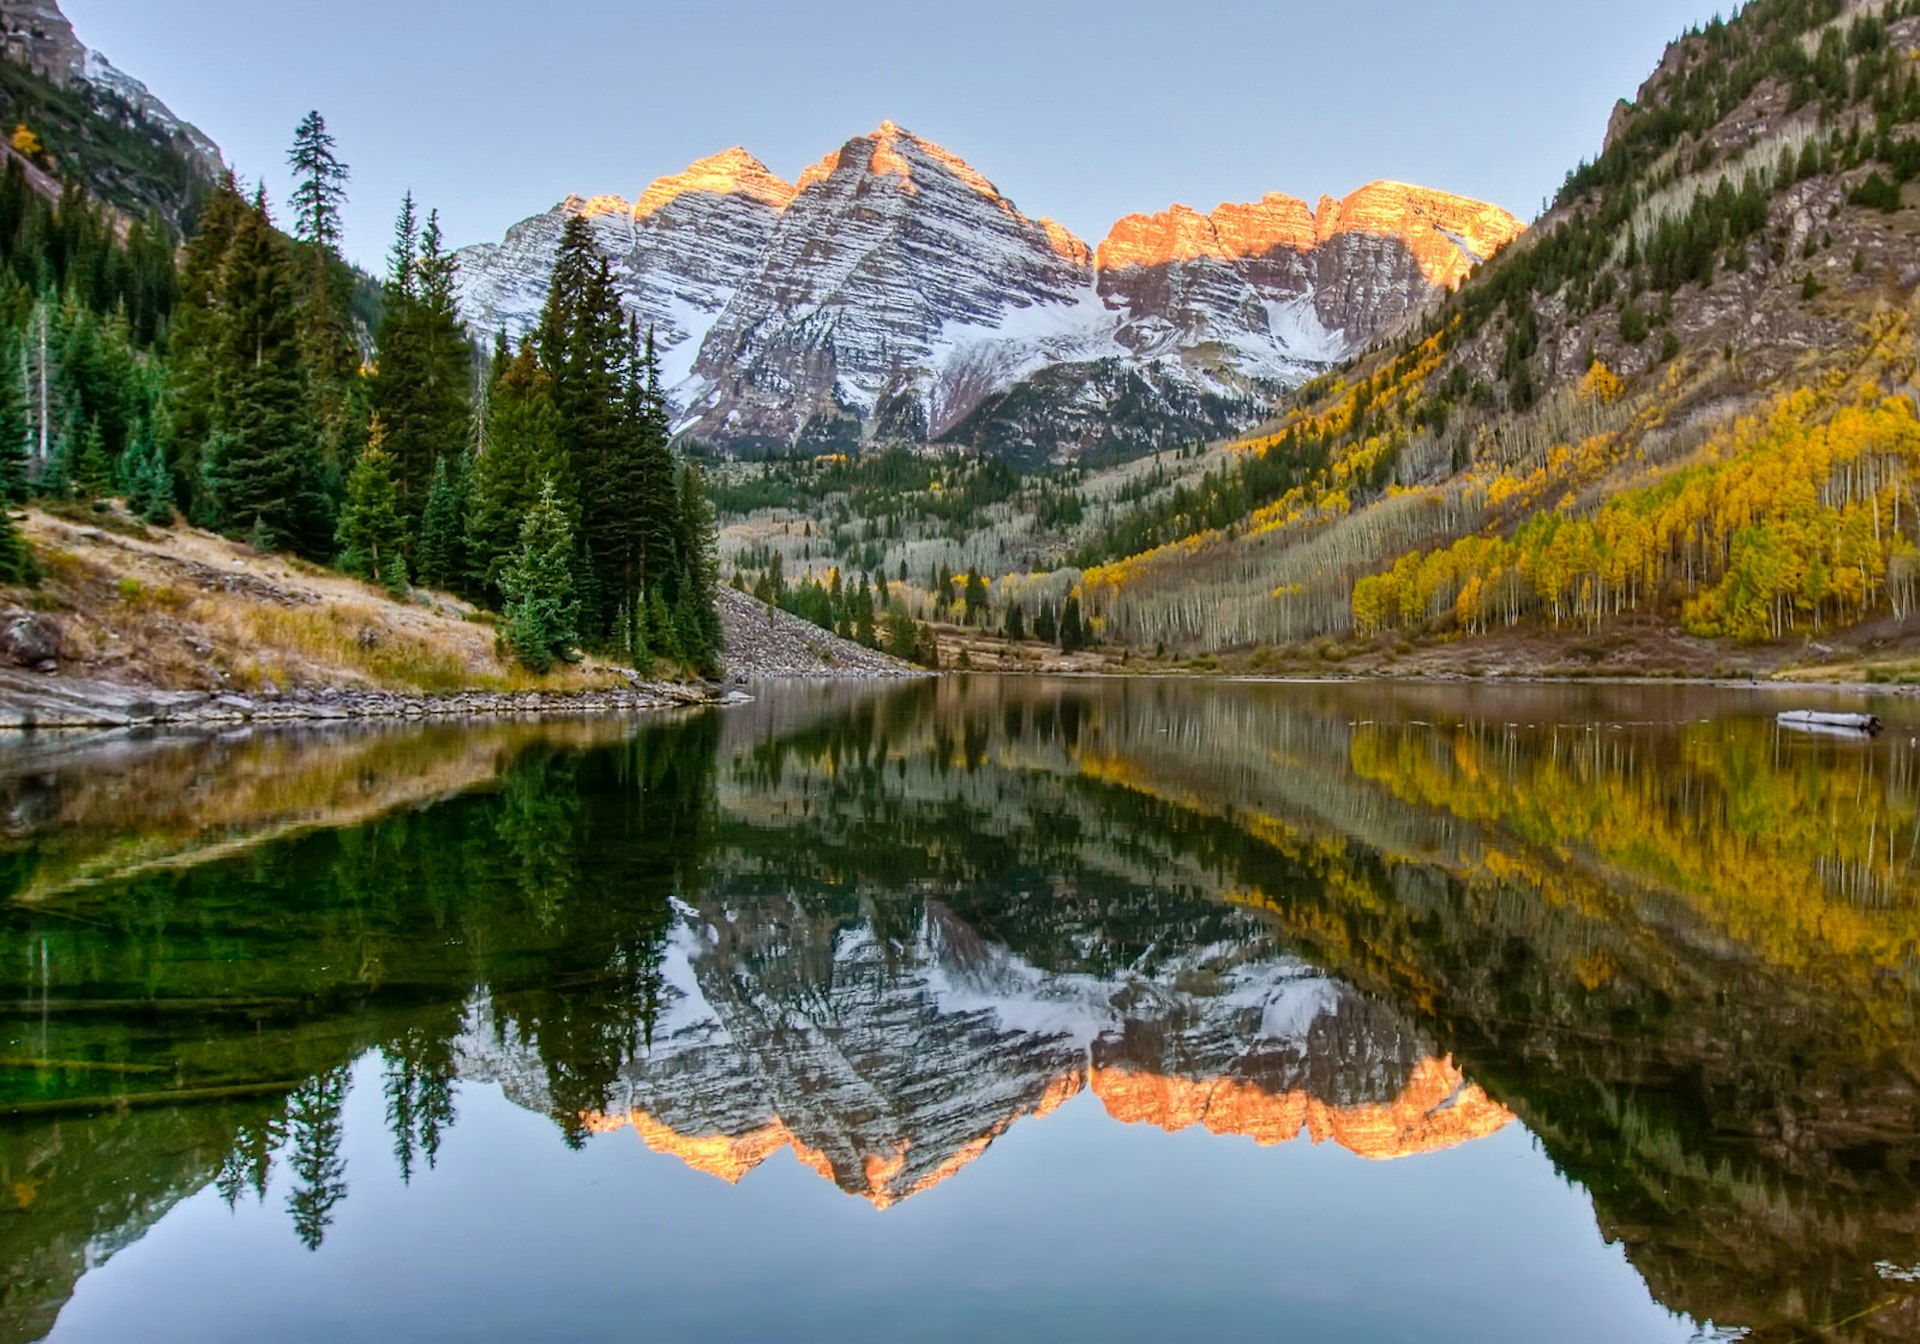 Sunrise hits snow dusted peaks of Maroon Bells while being reflected in a lake below, along with Aspen trees in their full fall foliage display of golden colors © Steve Whiston / Getty Images